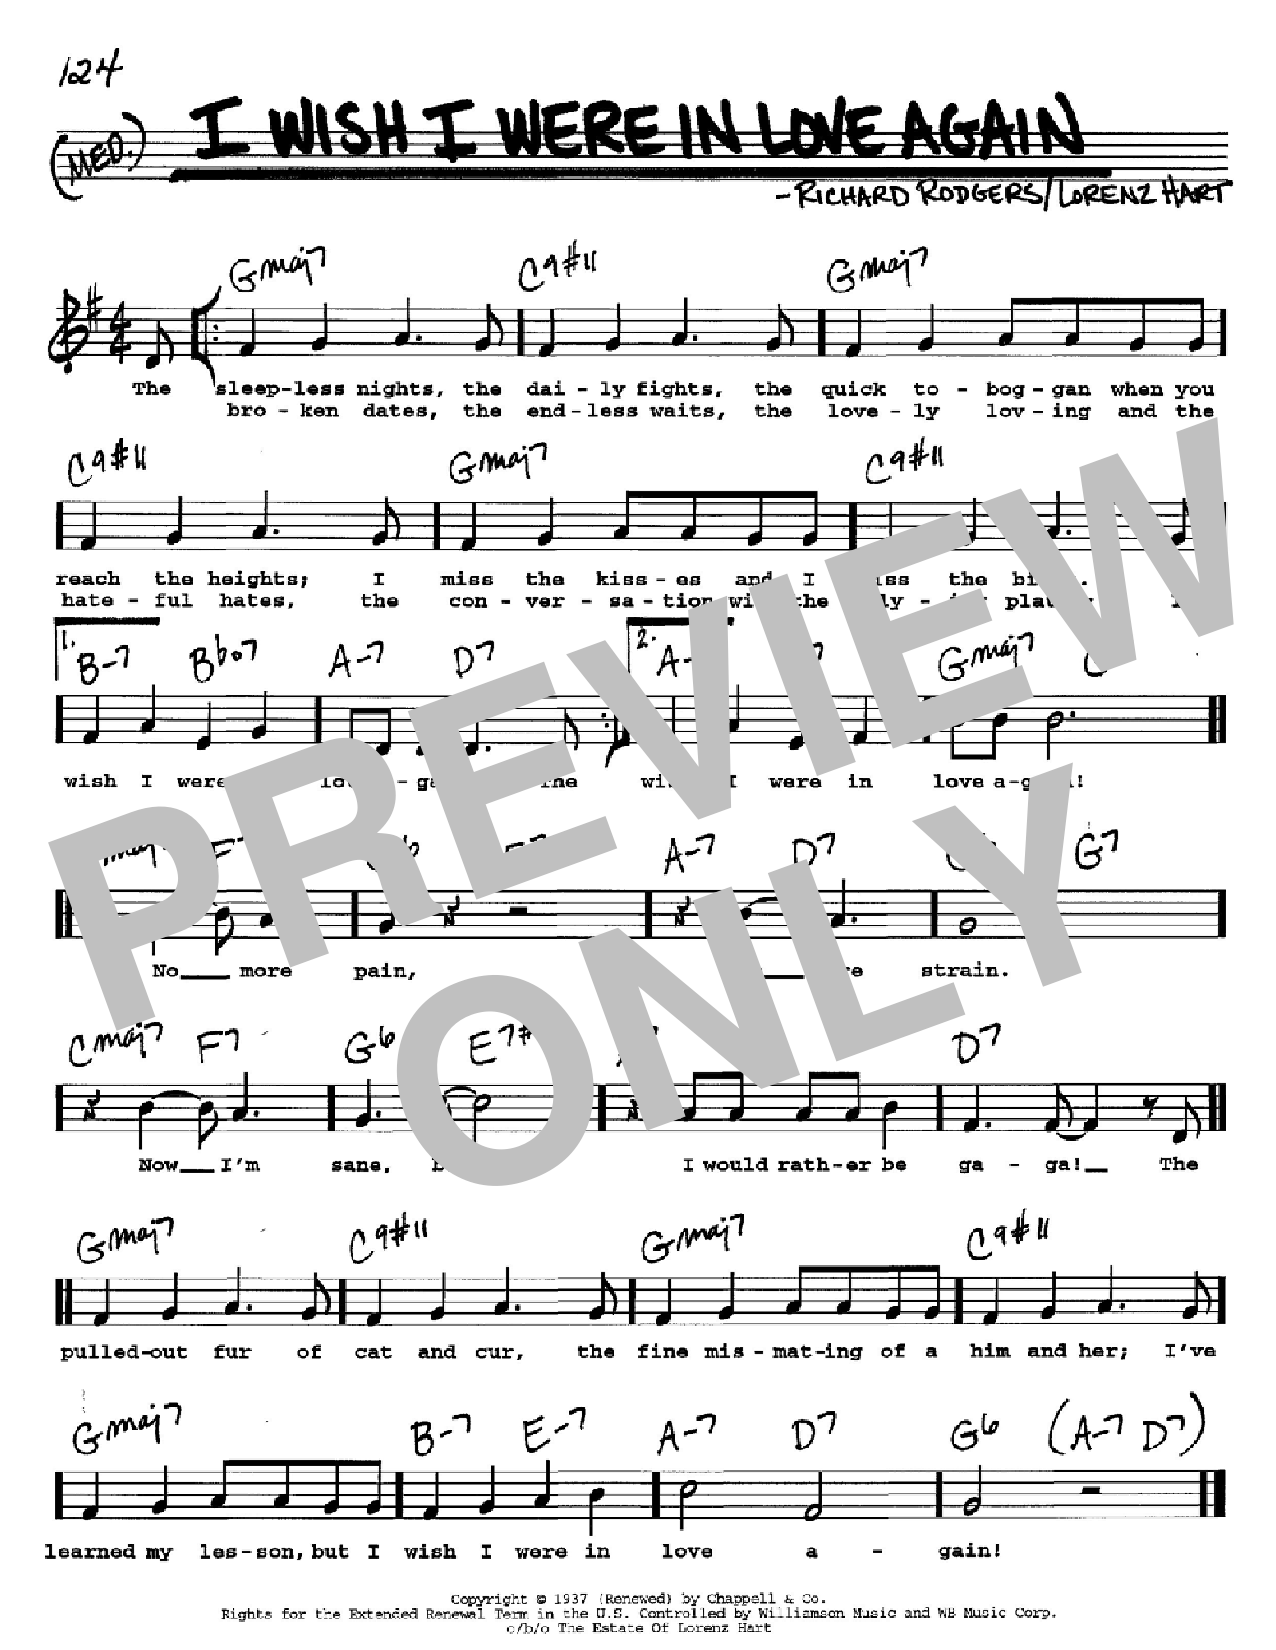 Download Rodgers & Hart I Wish I Were In Love Again Sheet Music